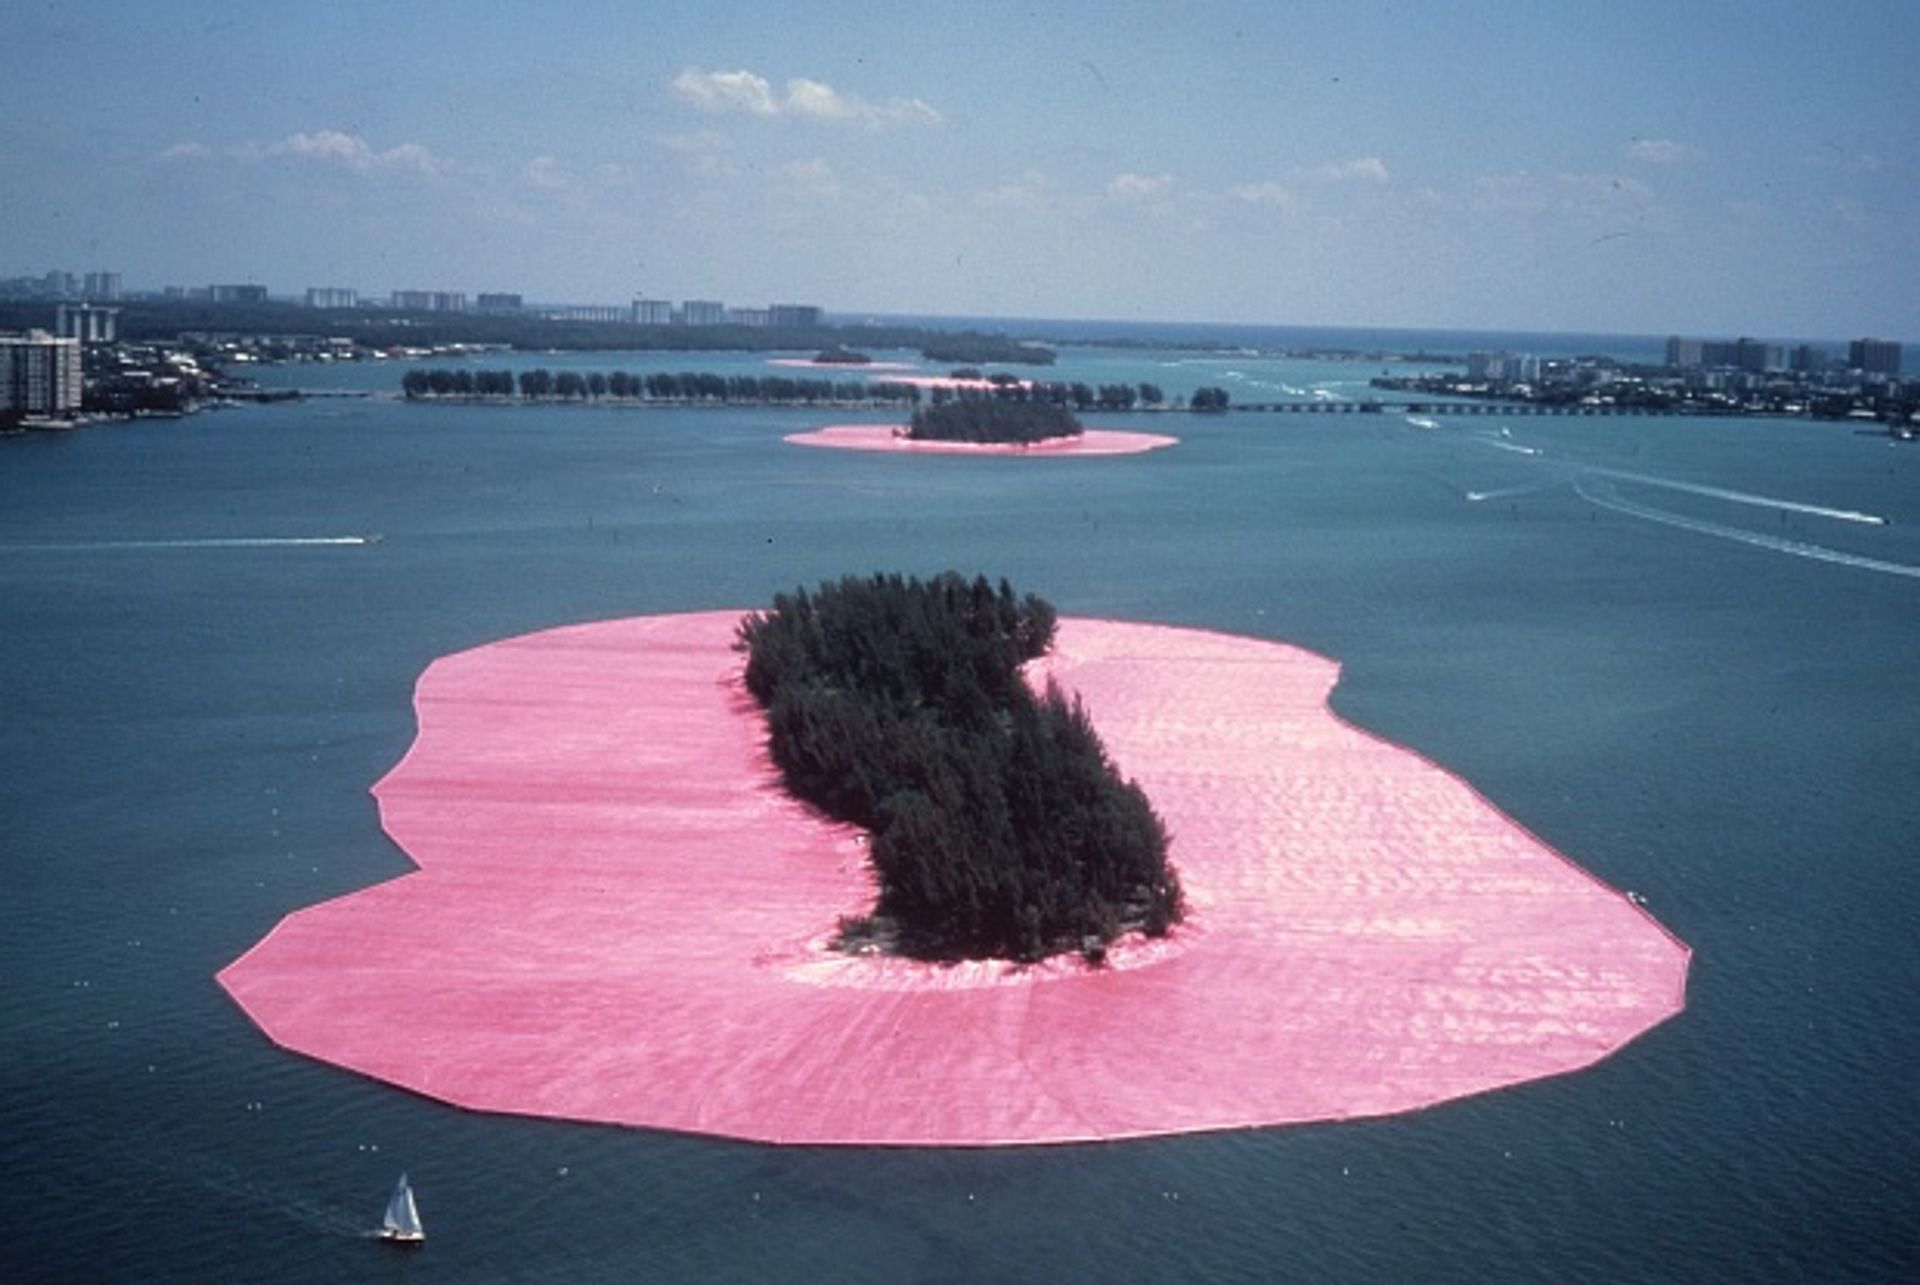 Christo and Jeanne-Claude made waves with Surrounded Islands (1983) in Miami’s Biscayne Bay © Christo, 1983